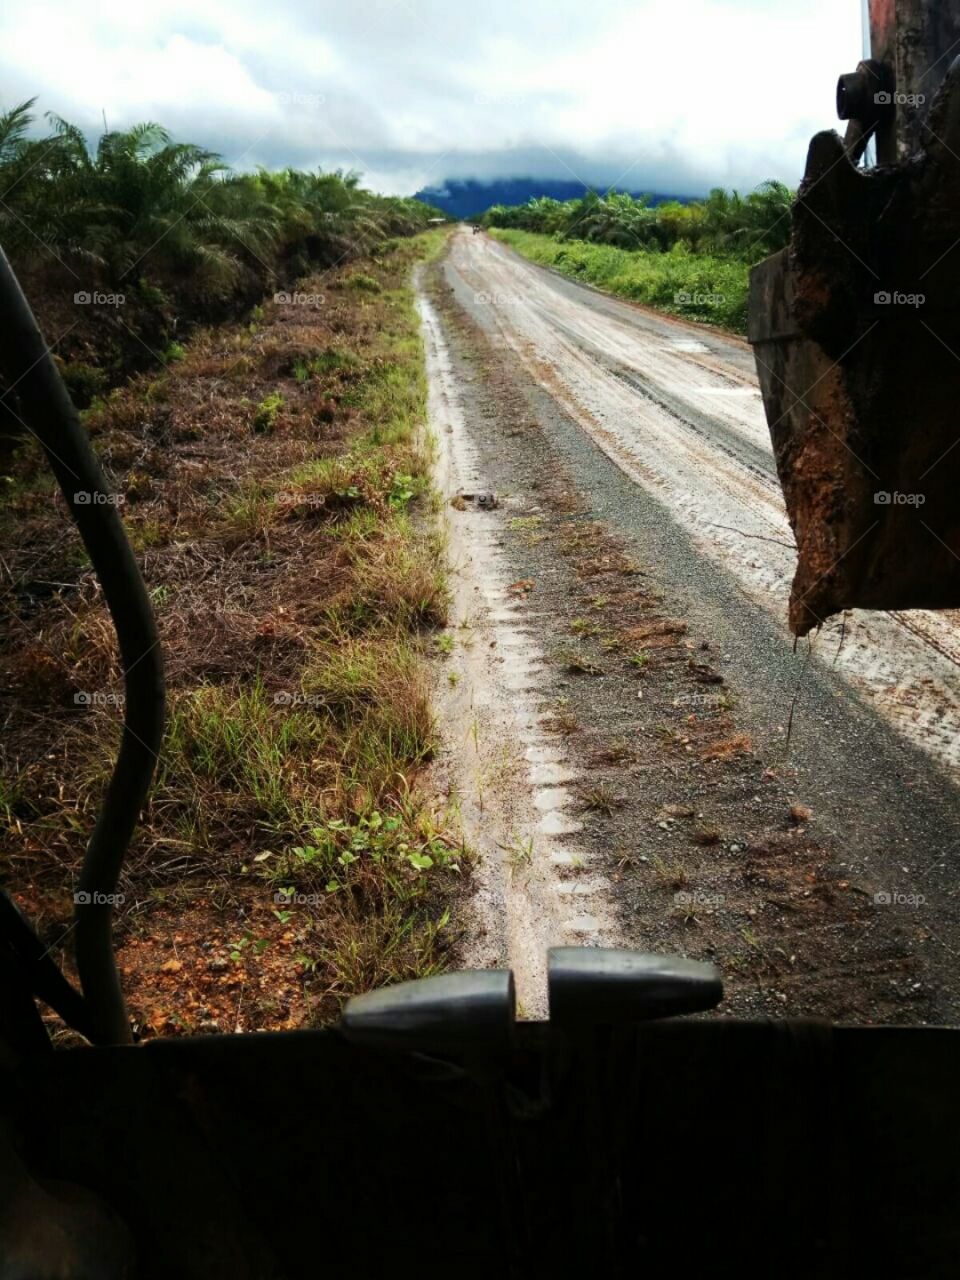 "the road to the Rentap hill around the road is a lot of oil palm trees"